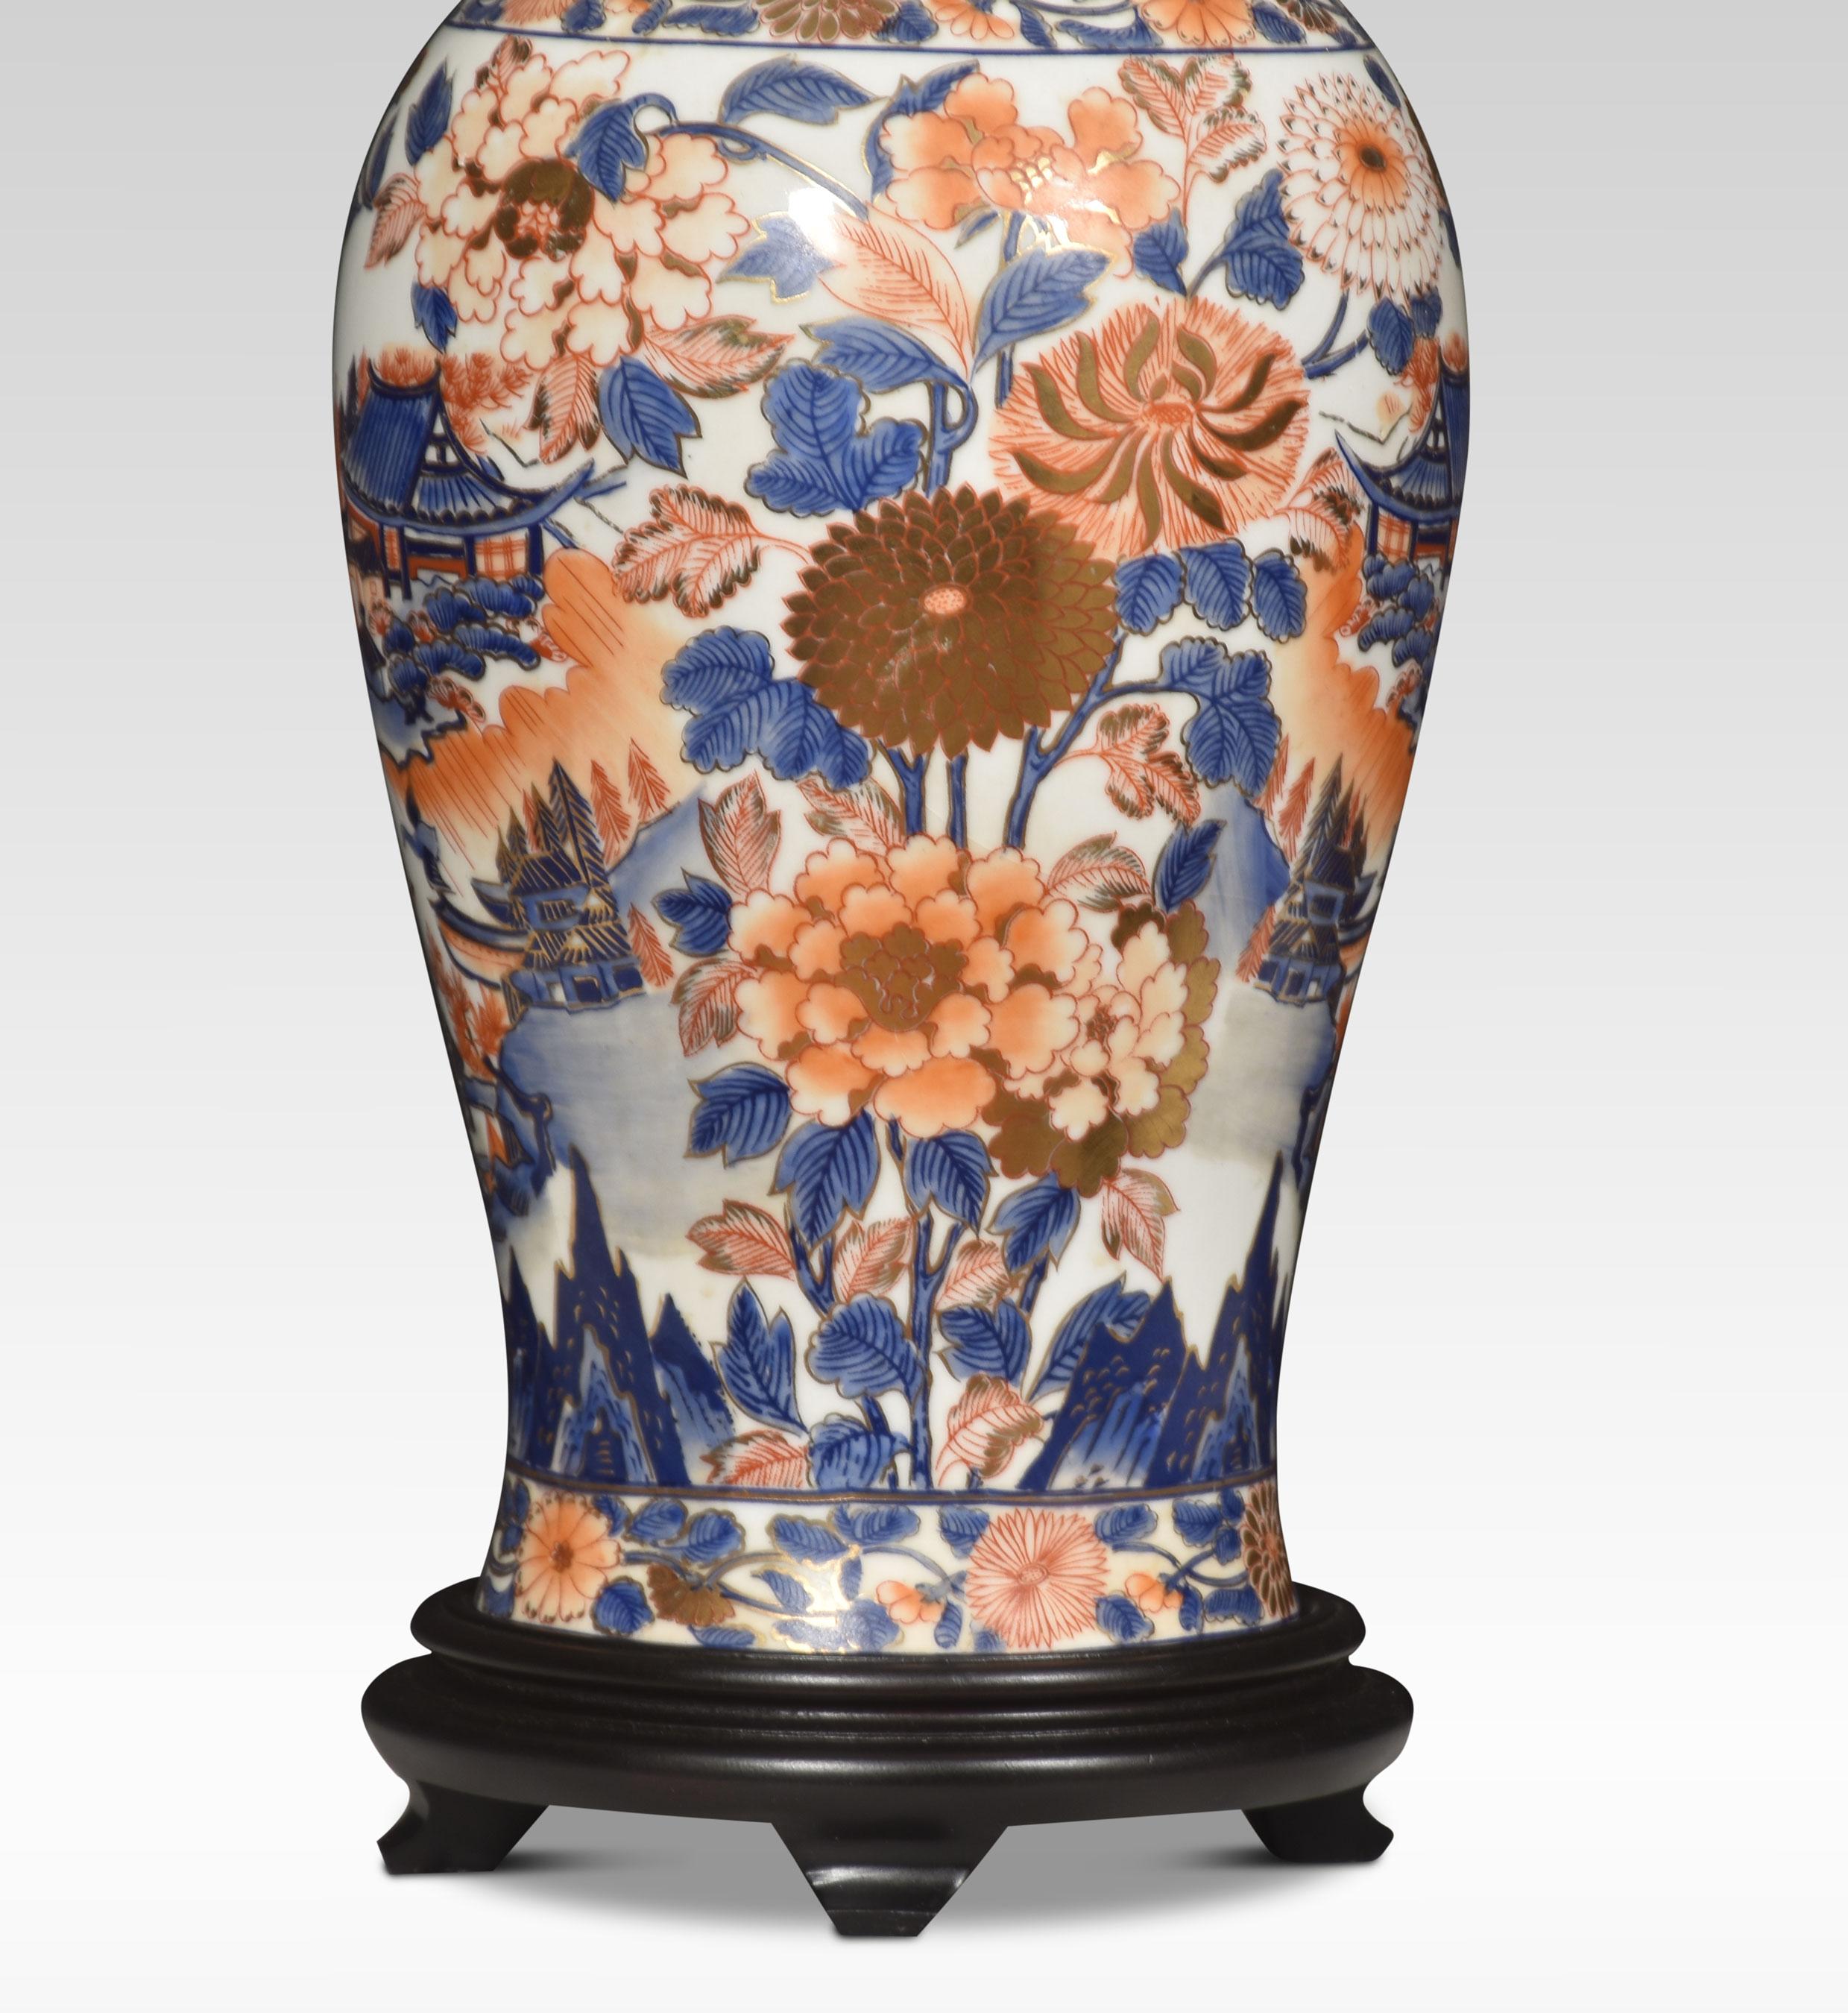 Japanese Imari porcelain vase converted to a table lamp, raised up on ebonised base.
Dimensions
Height 19 Inches
Width 7.5 Inches
Depth 7.5 Inches.